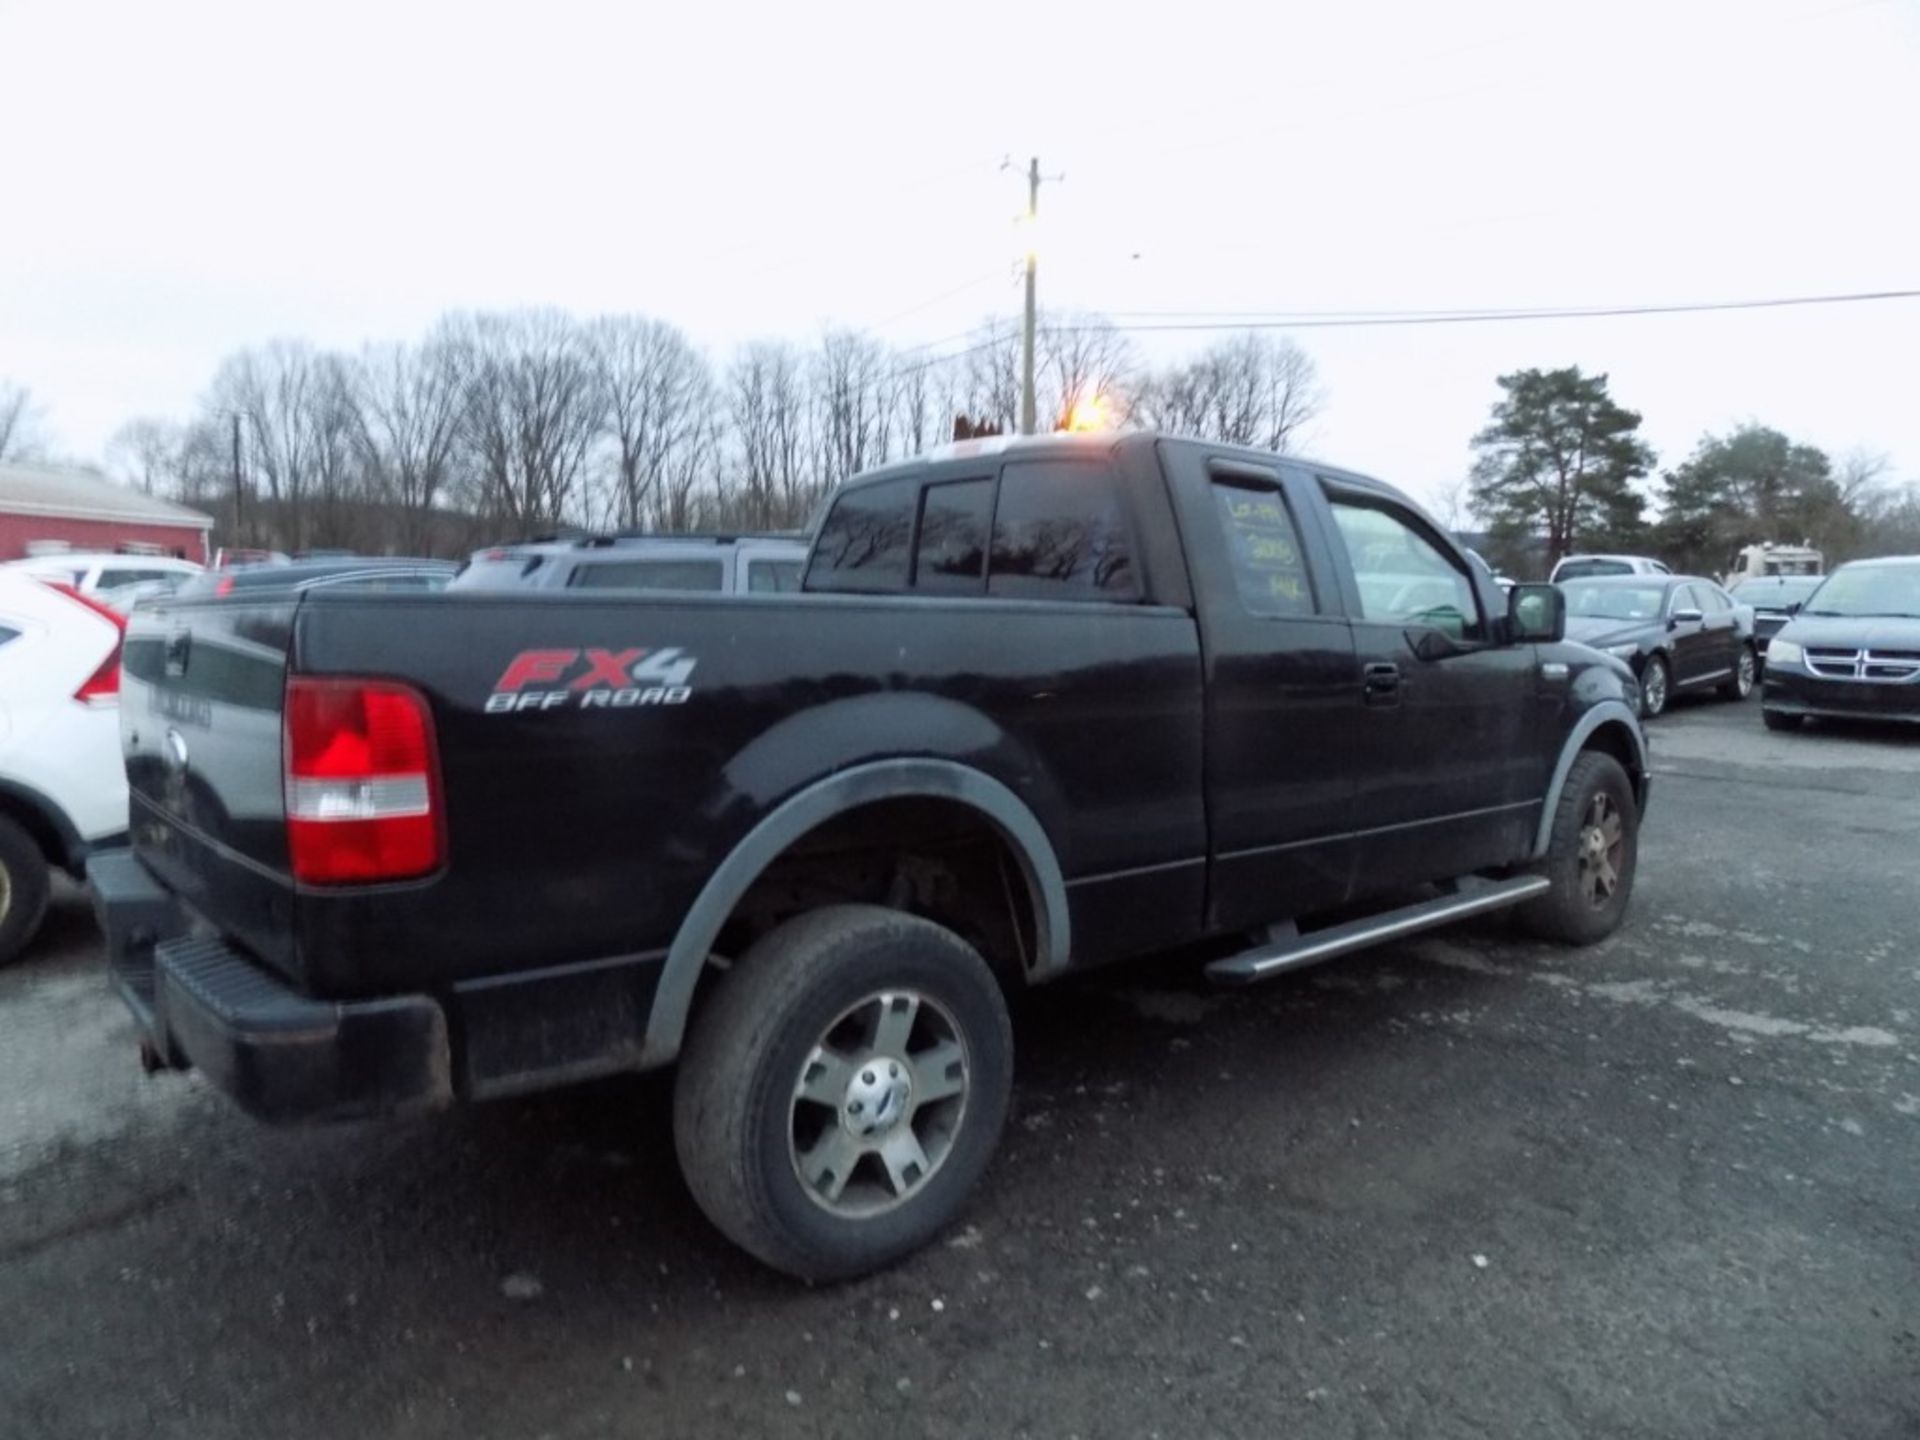 2008 Ford F150 Ext. Cab FX4, 4x4, Leather, Black, 141,861 Mi, Vin# 1FTPX14528FB94660 - OPEN TO ALL - Image 3 of 8